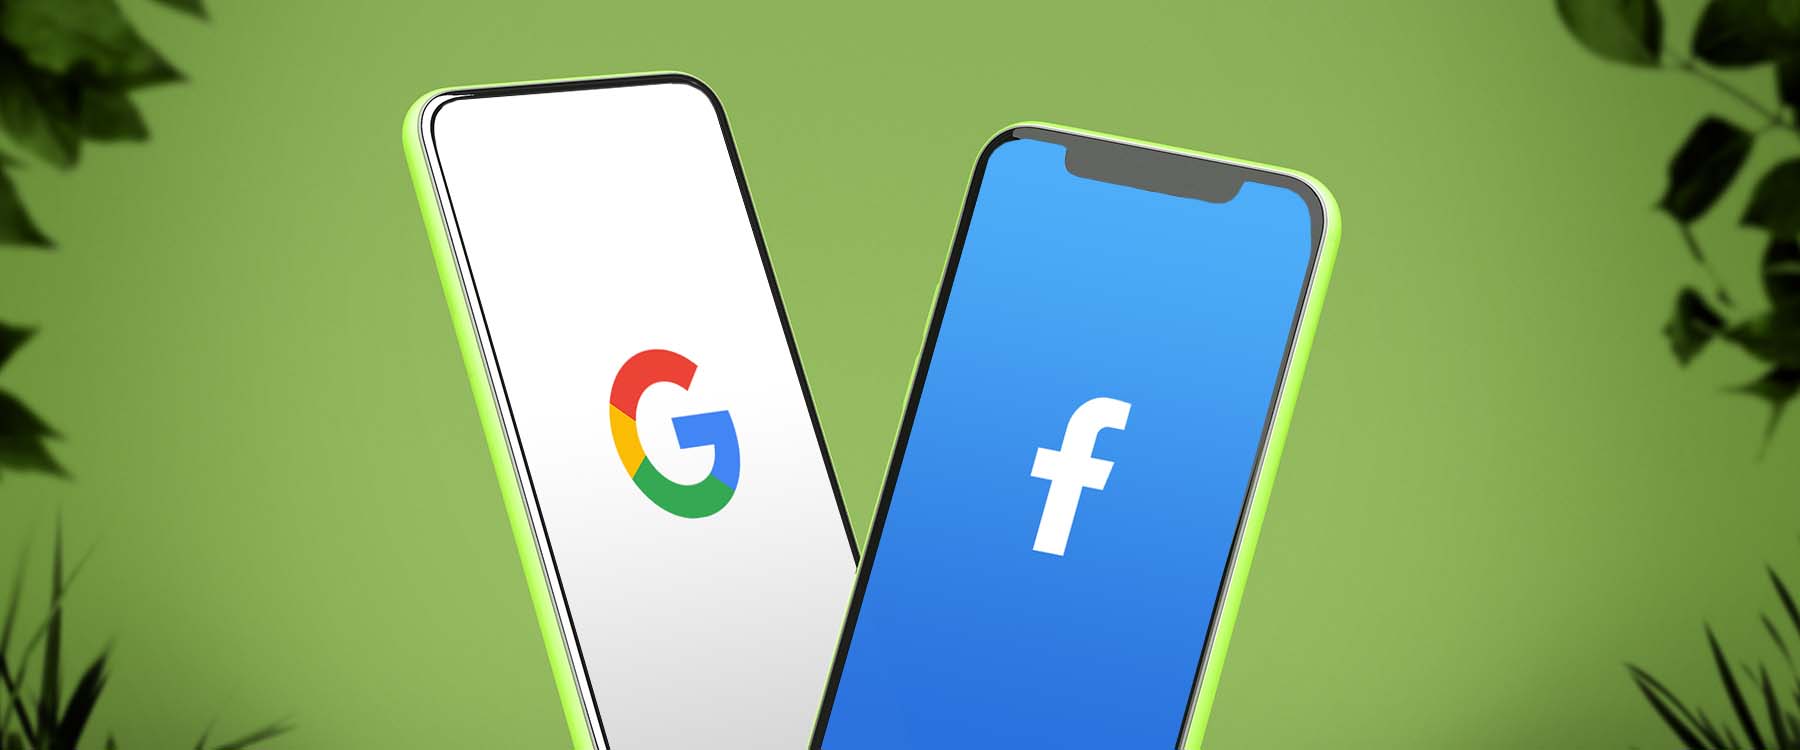 Two phones with facebook and google logos on them